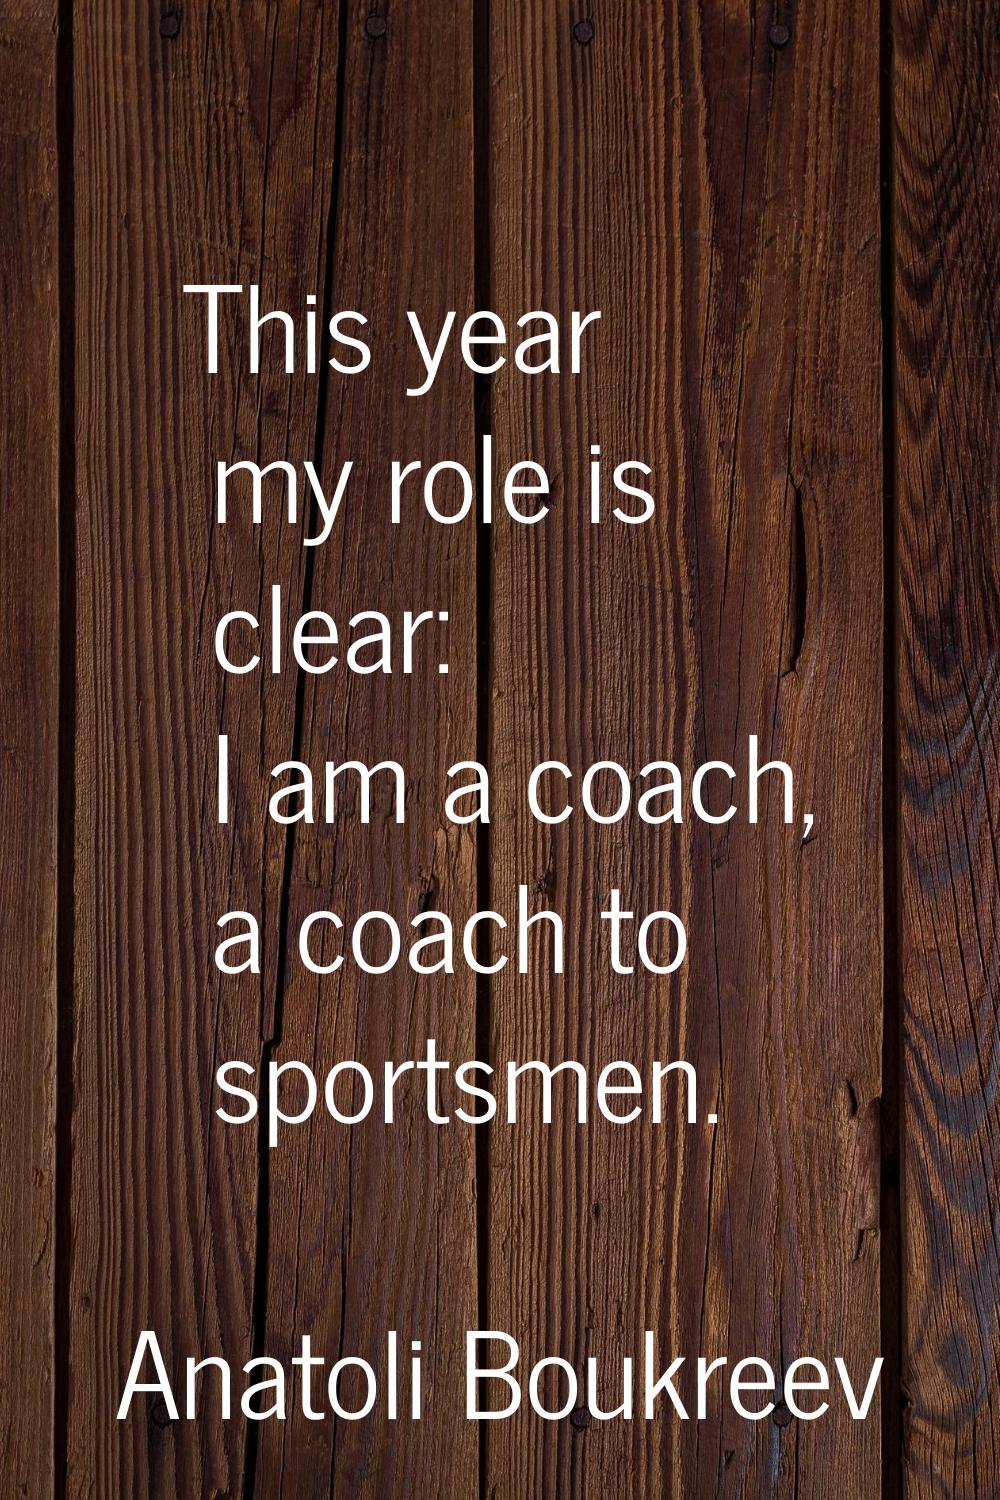 This year my role is clear: I am a coach, a coach to sportsmen.